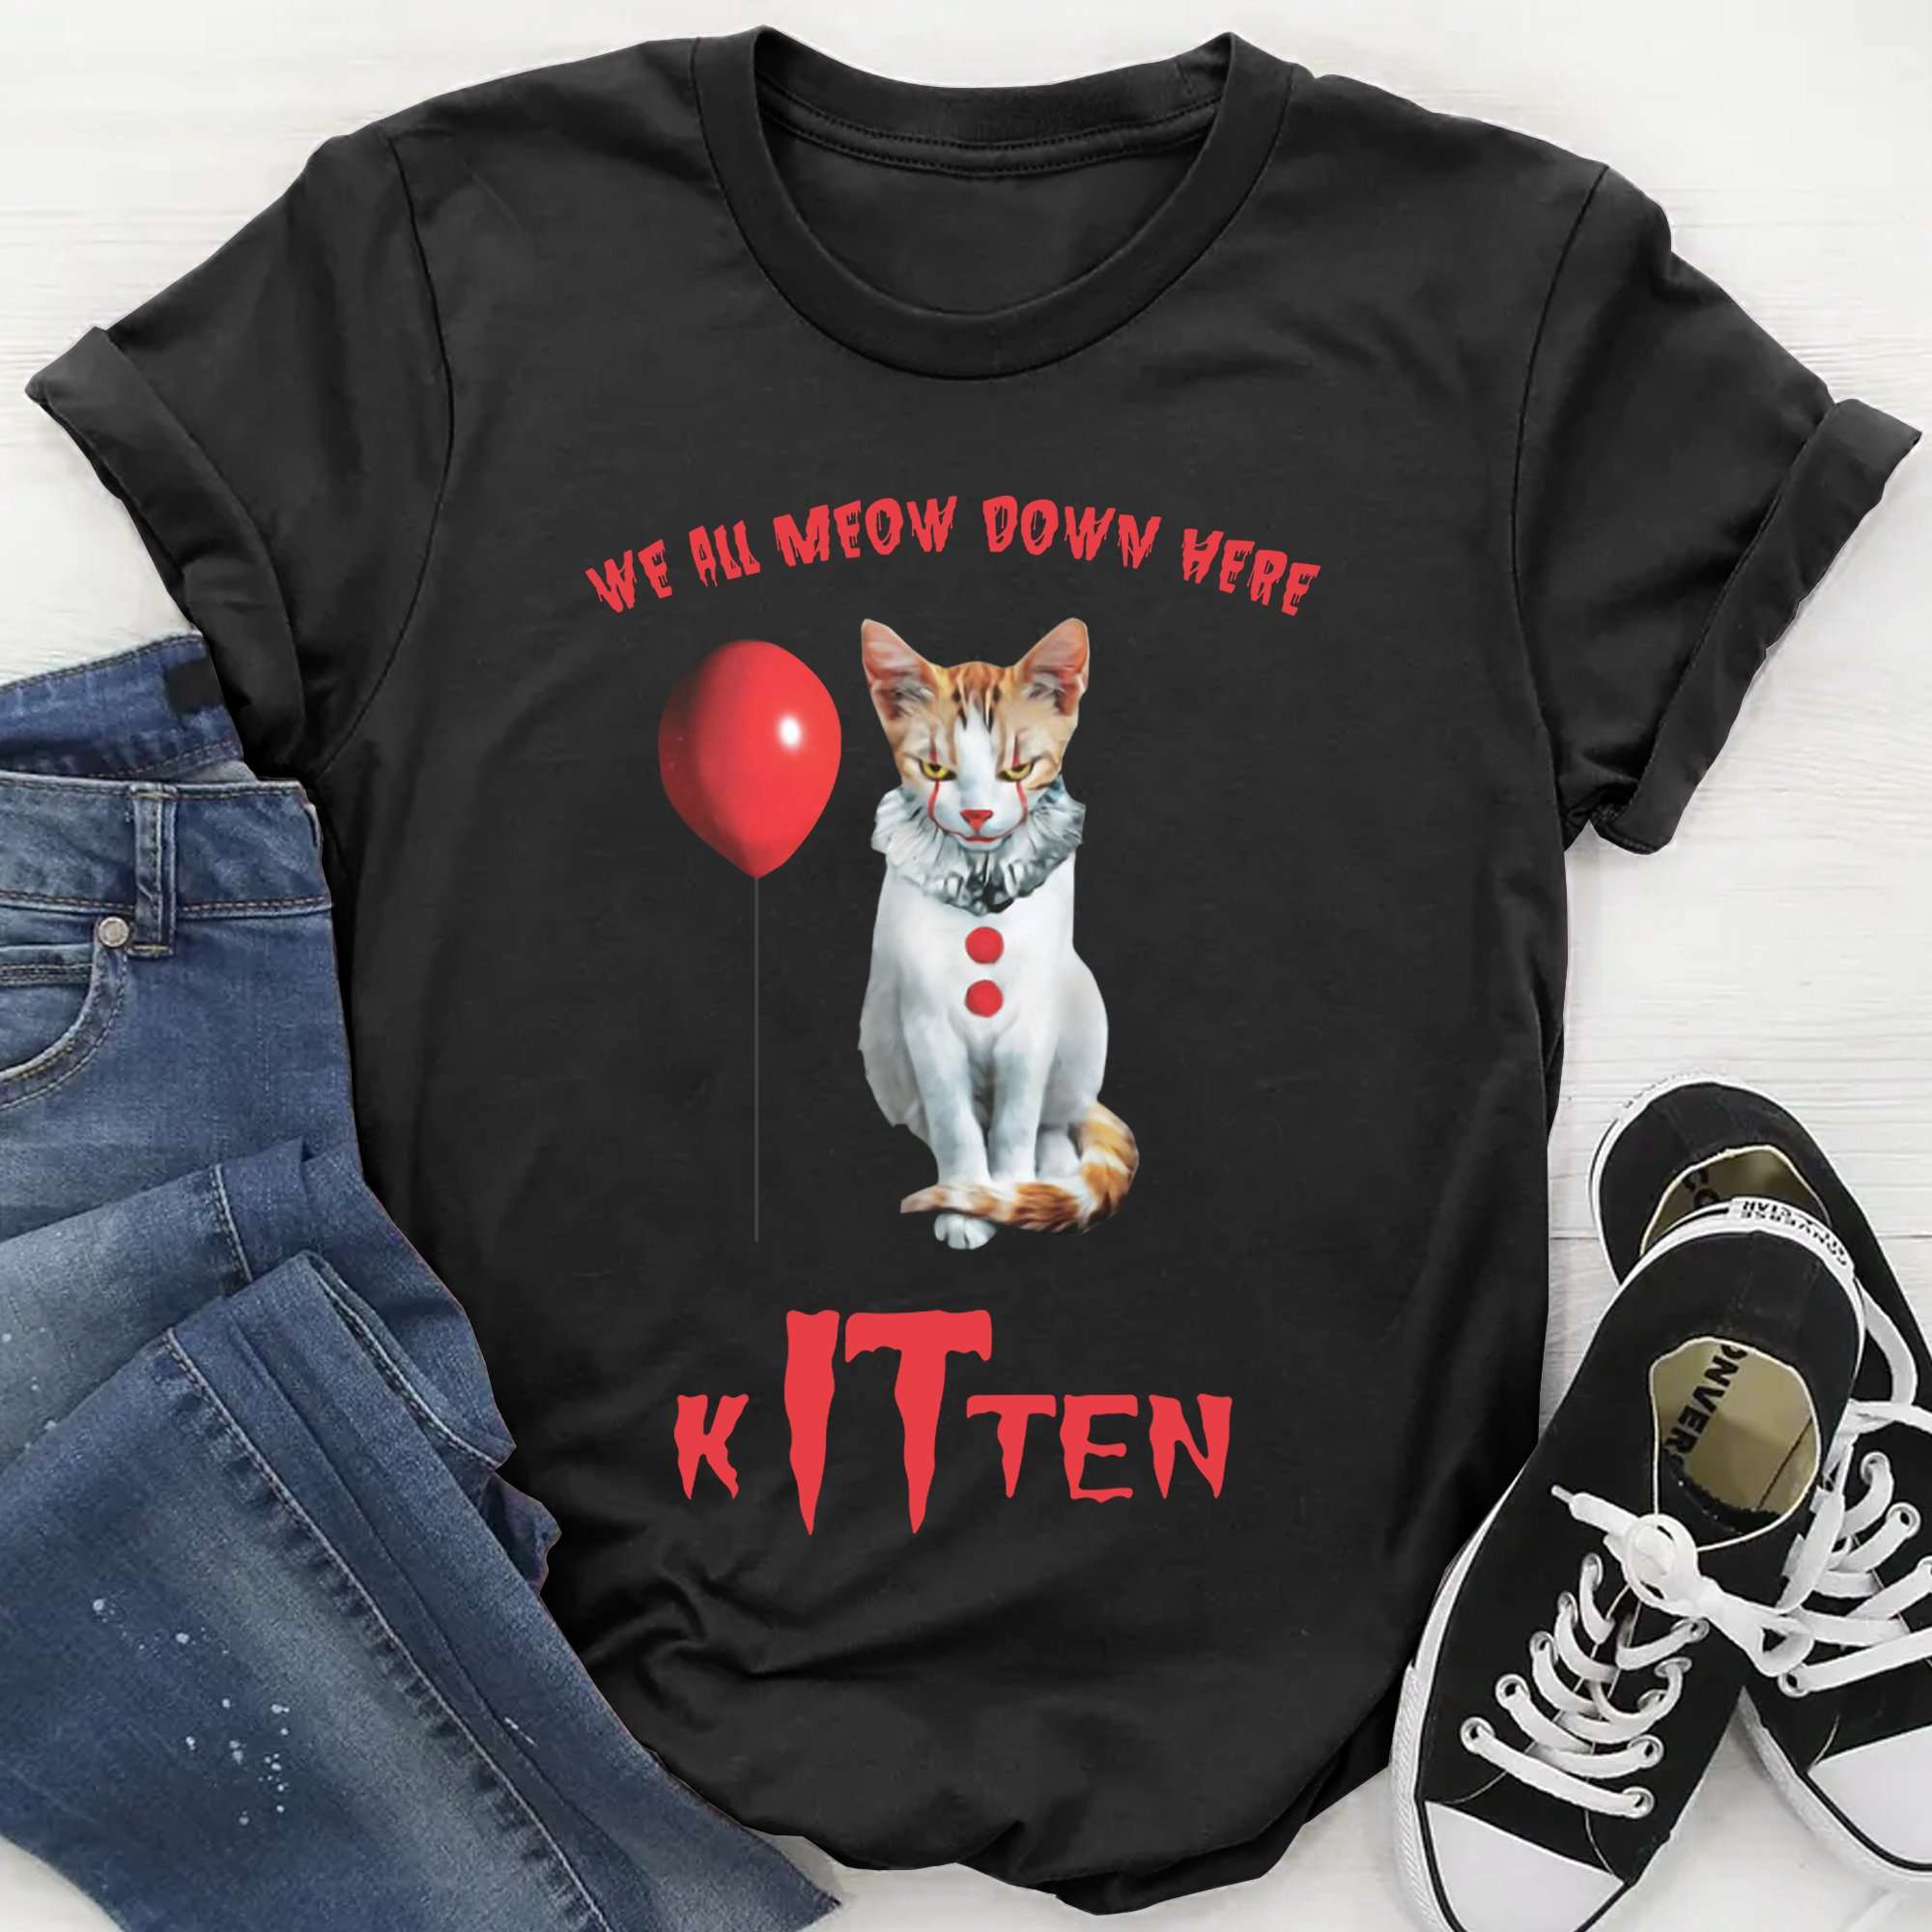 We all meow down here kitten - Cat IT